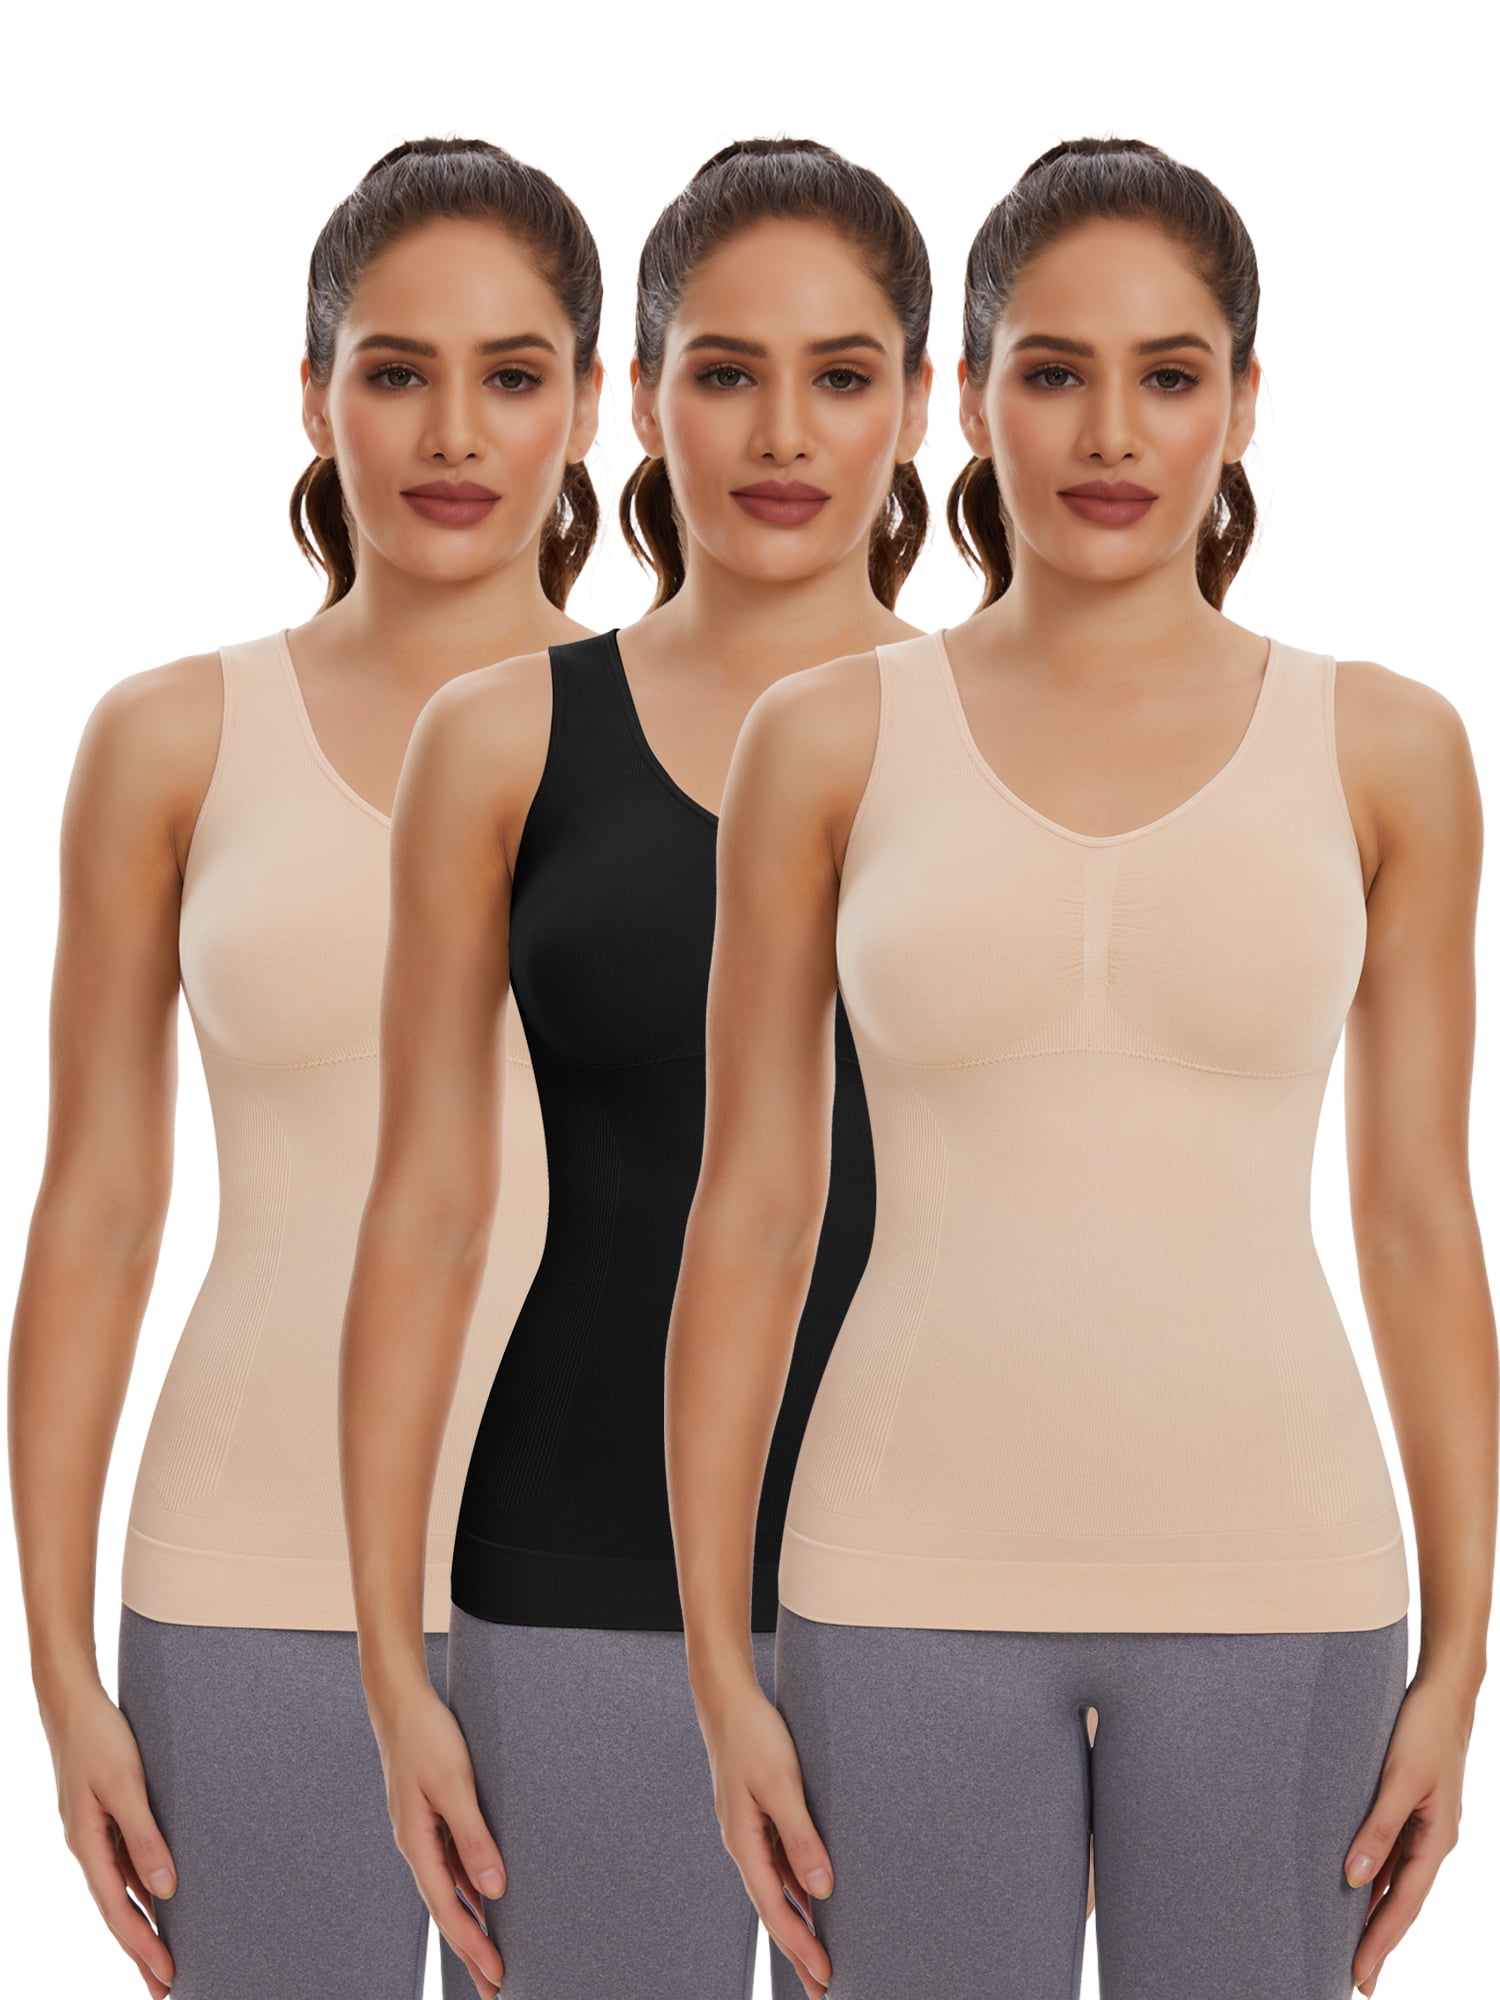 COMFREE Camisoles for Women with Built in Bra Slimming Cami Shaper Tummy  Control Tank Top Shapewear Body Shaper